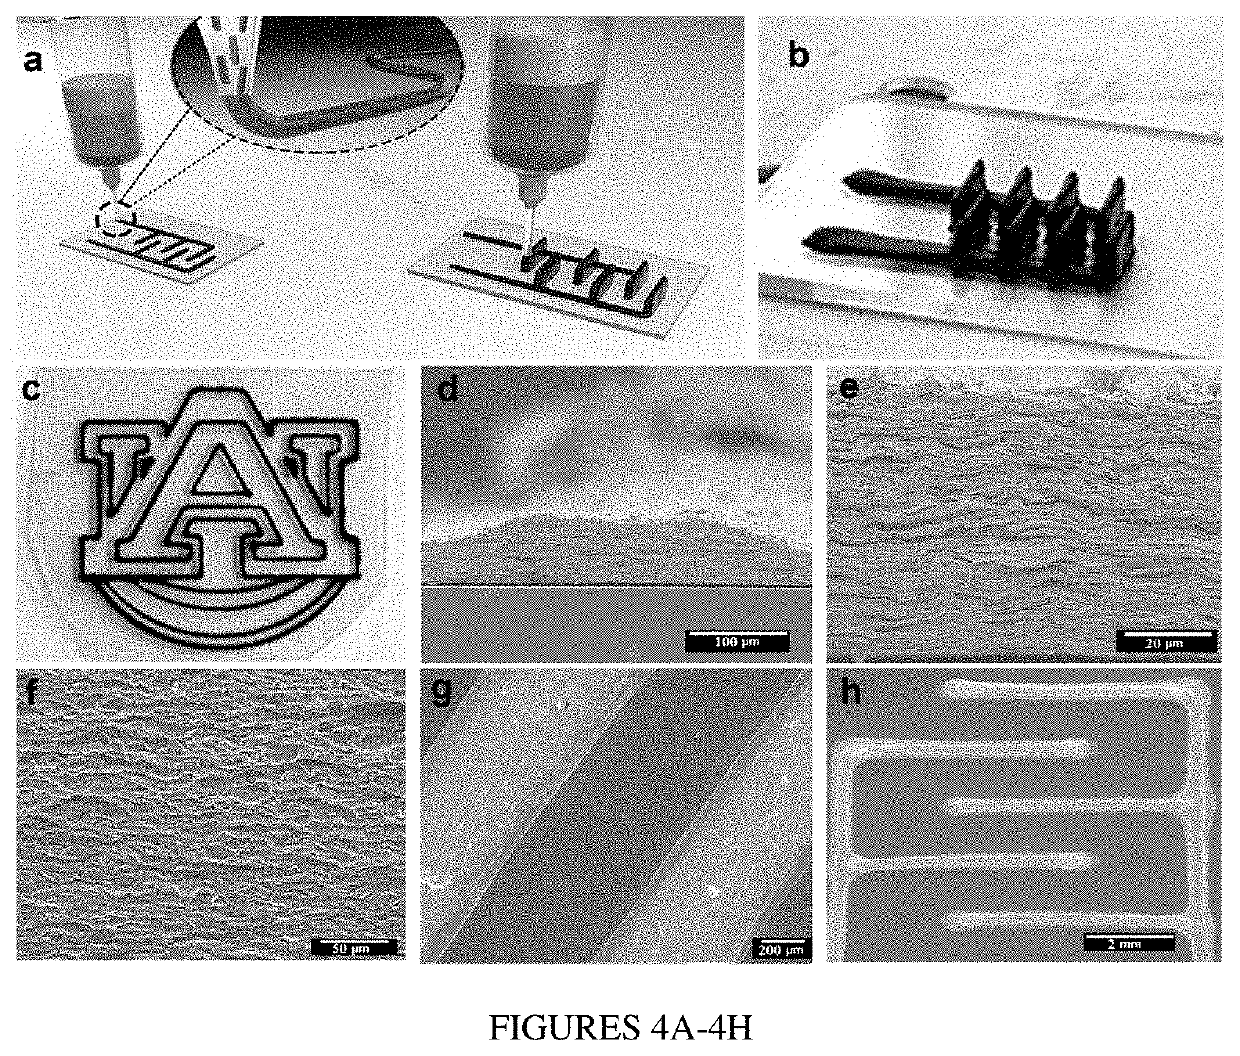 3D printing of additive-free mxene ink for fabrication of micro-supercapacitors with ultra-high energy densities